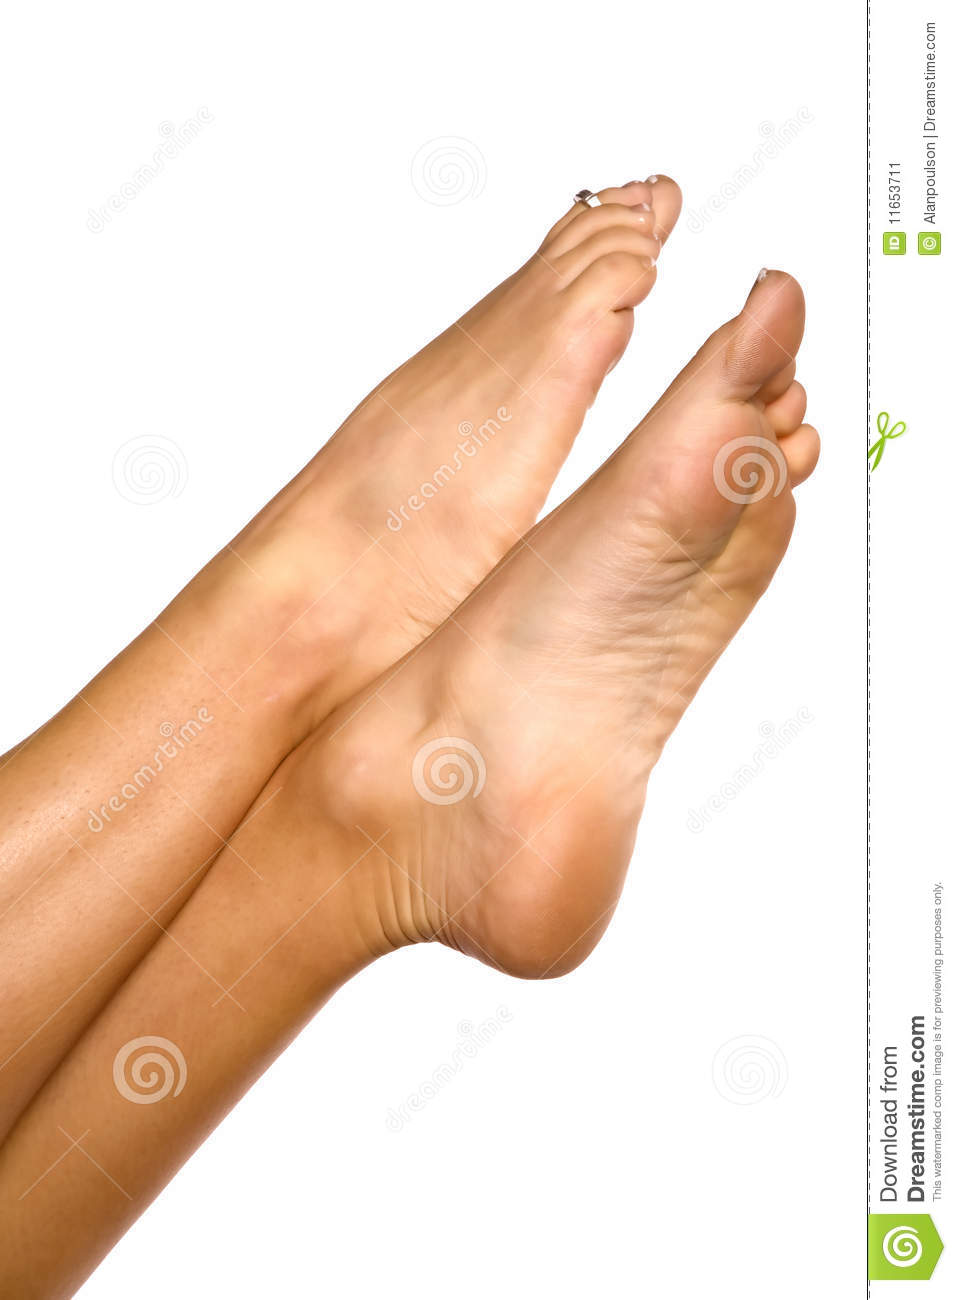 Woman S Feet Crossed At The Ankles Pointing Up Wards 